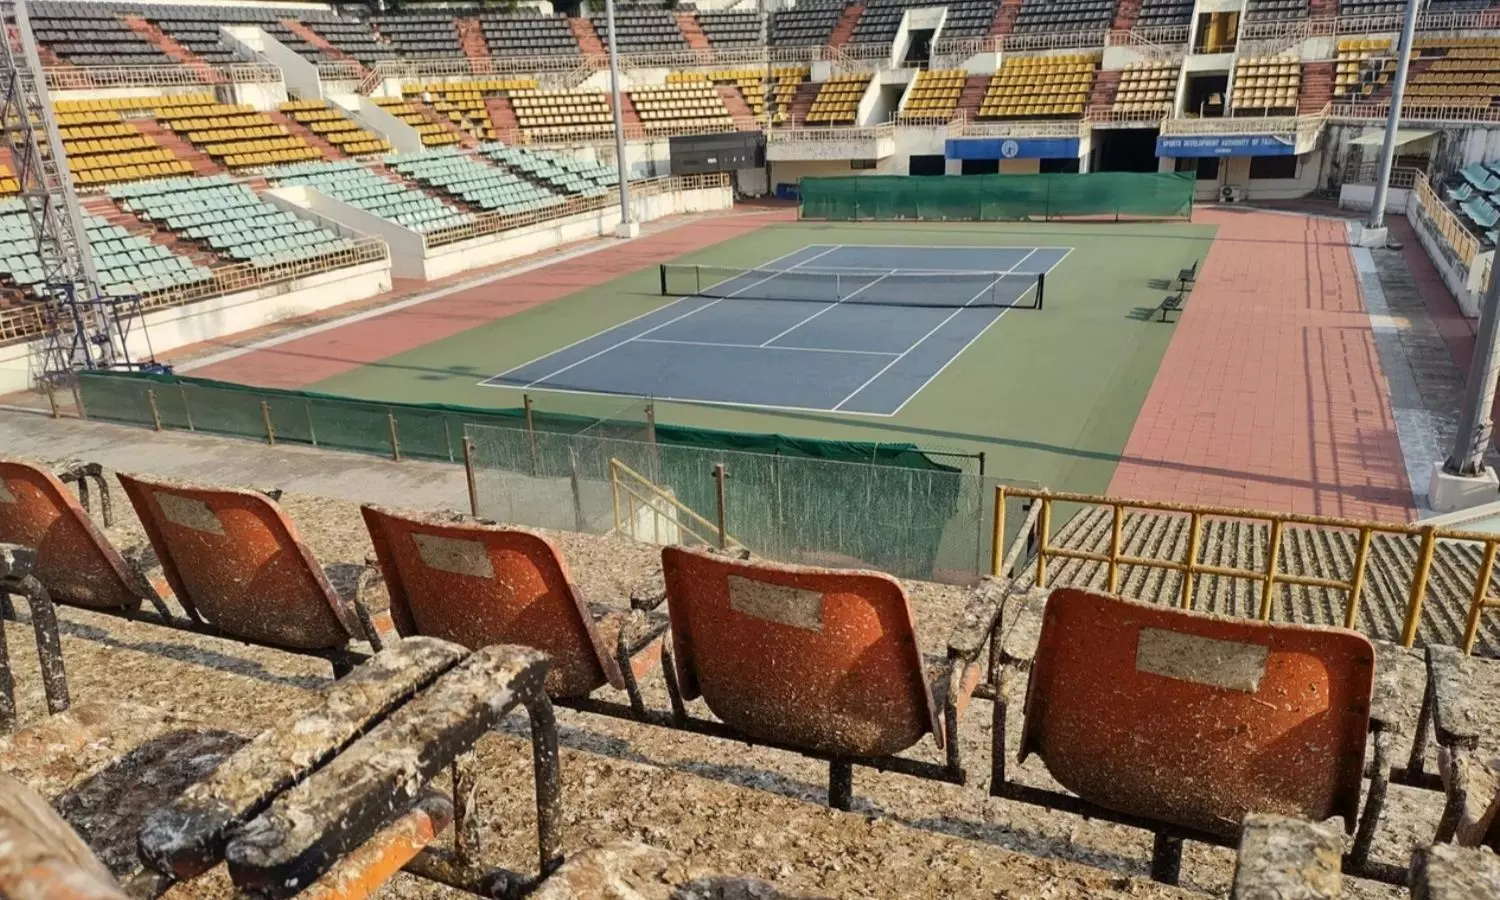 Stadium in a shabby mess, Chennai aims to make a comeback on the global tennis tour